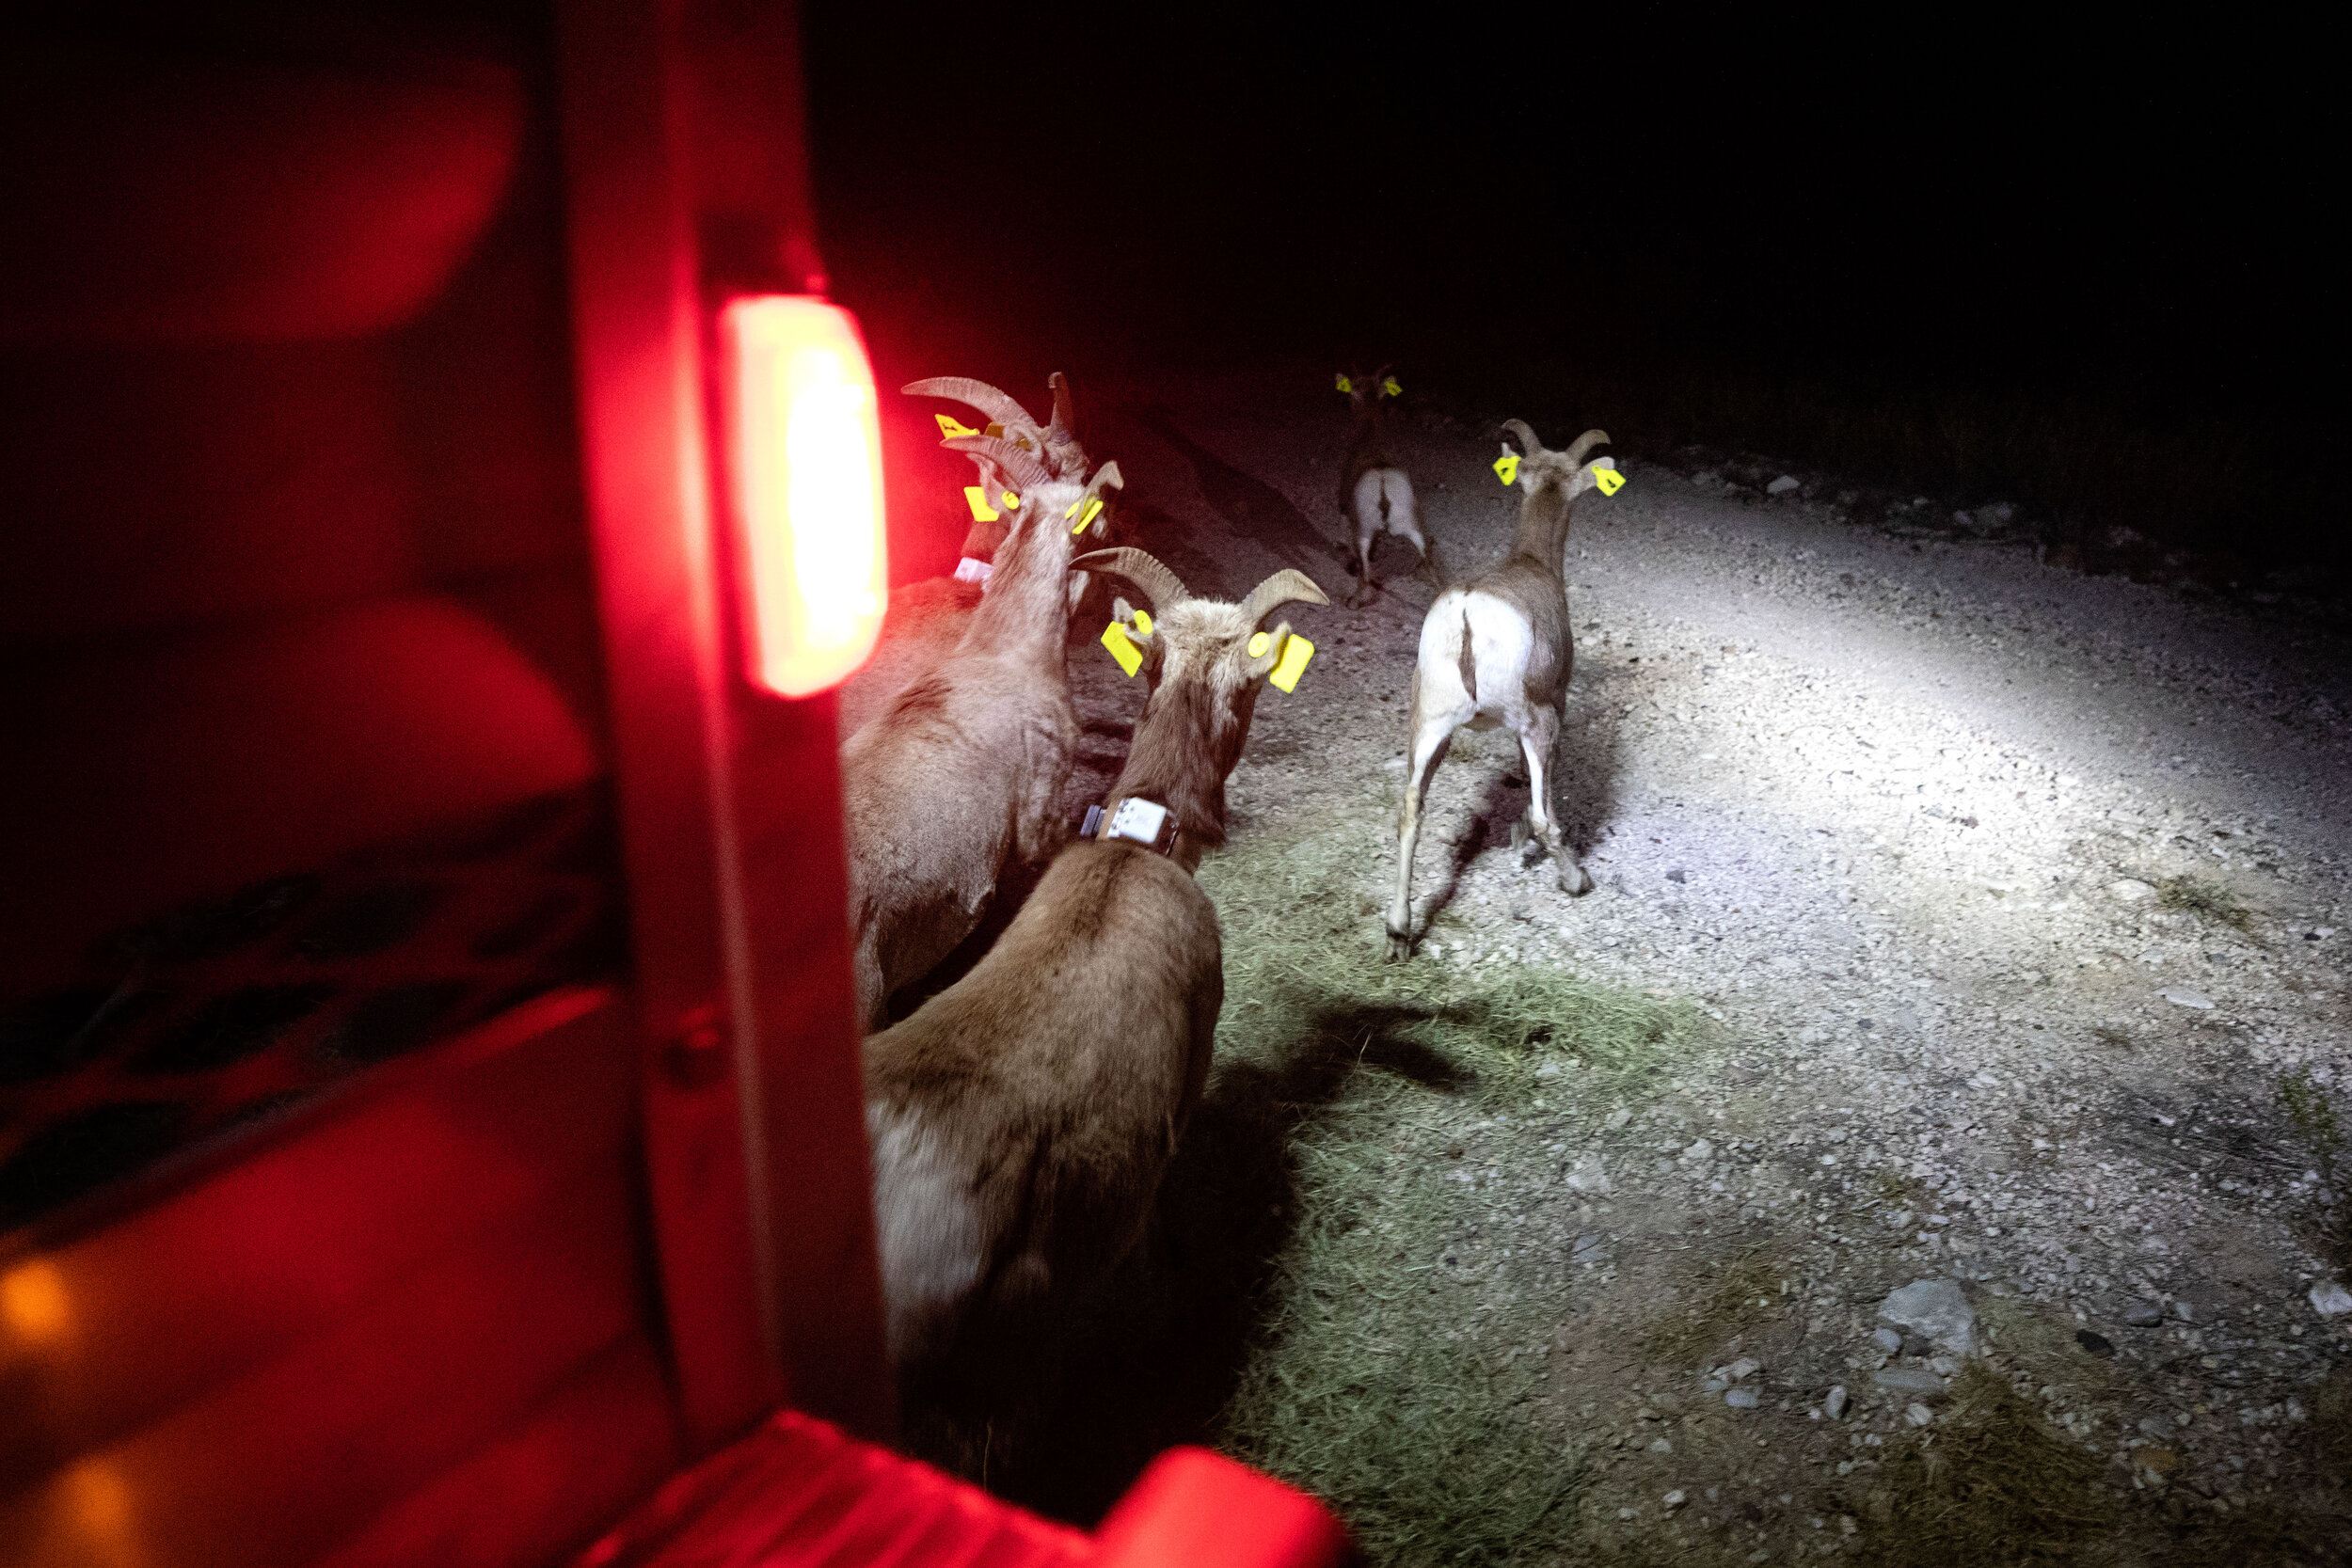  After a two-and-a-half hour drive from Elephant Mountain, the Big Horn Sheep are released after sunset at the Black Gap Wildlife Management Area. 